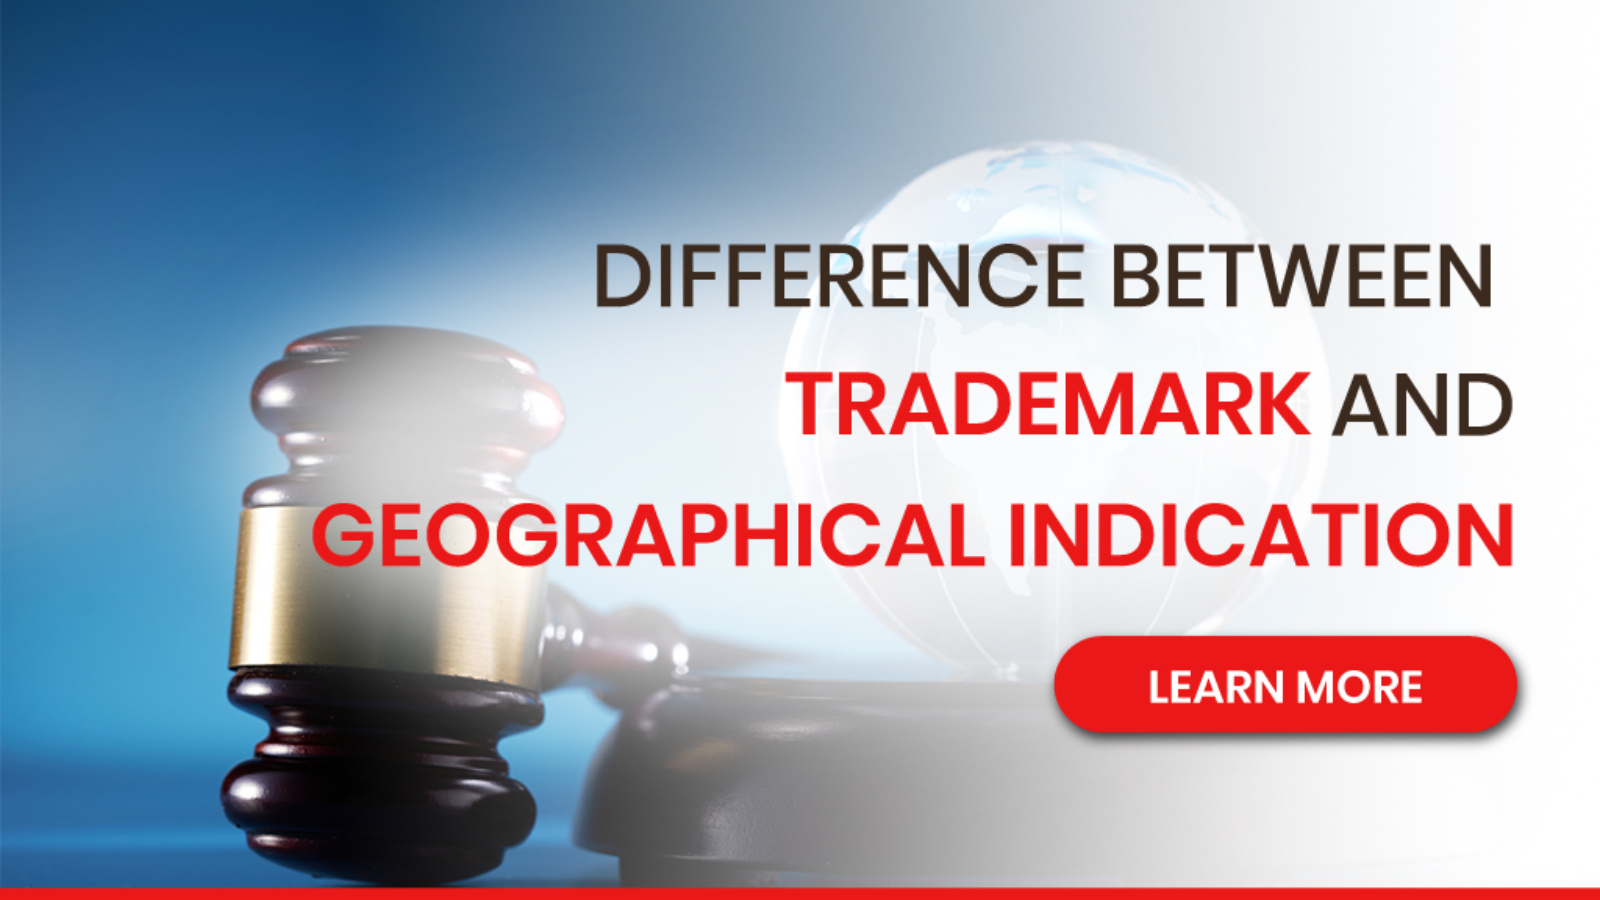 Trademark and Geographical Indication